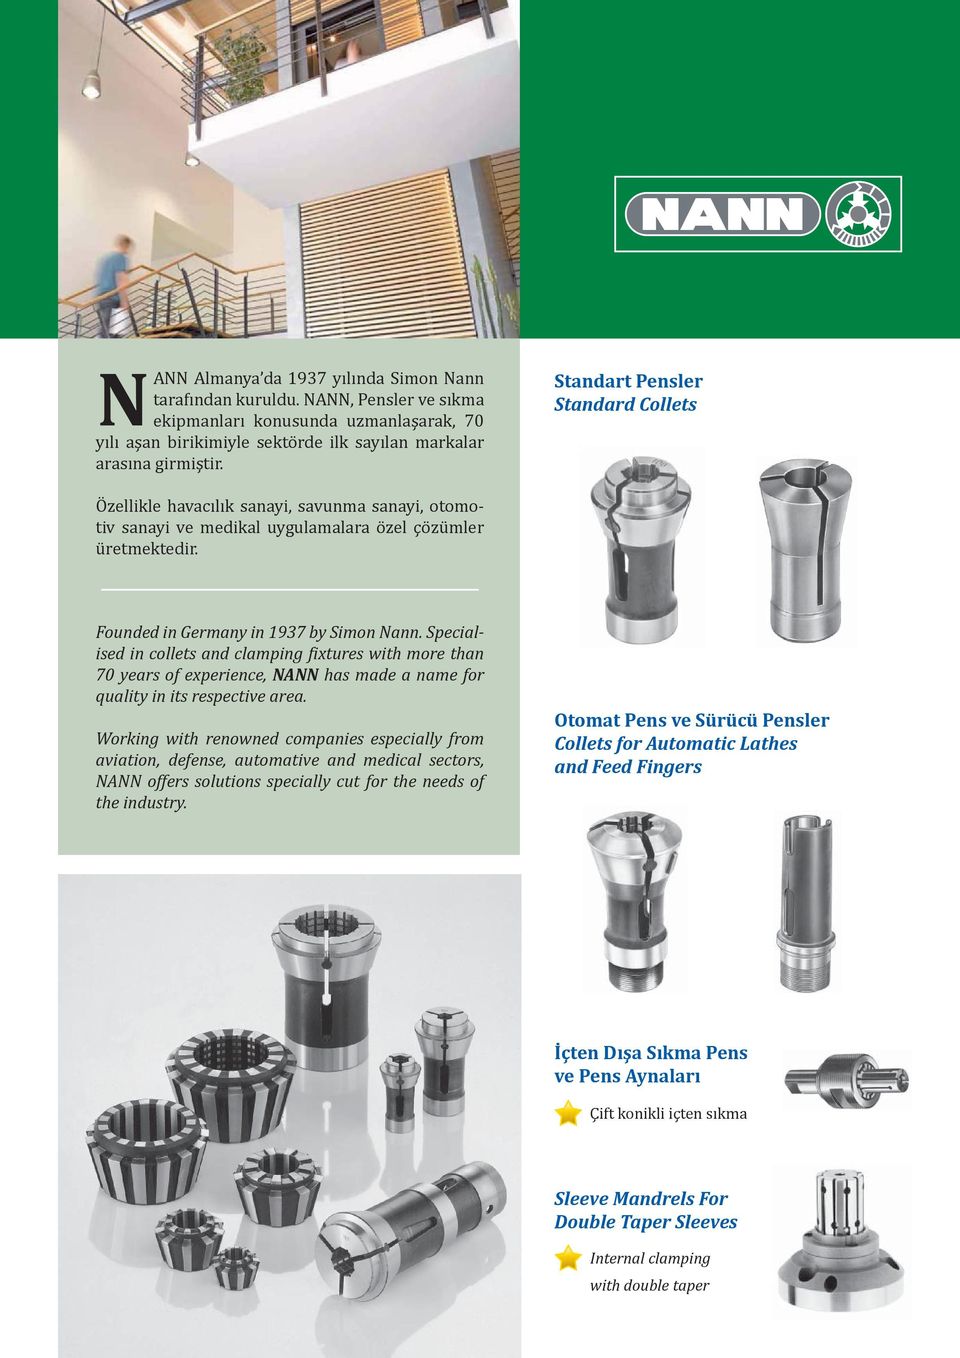 Specialised in collets and clamping ixtures with more than 70 years of experience, NANN has made a name for quality in its respective area.